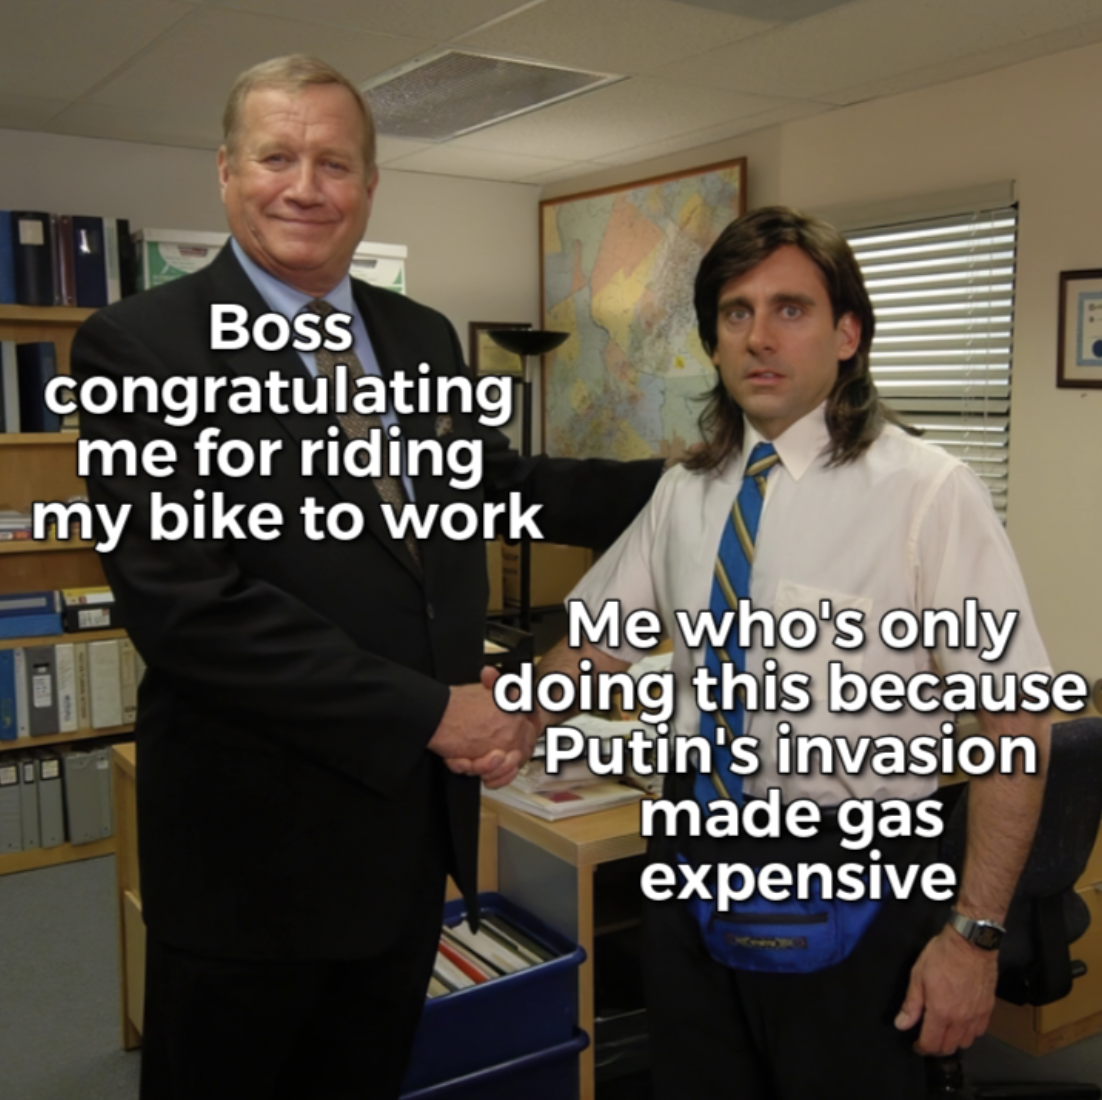 boss says we are family - Boss congratulating me for riding my bike to work Me who's only doing this because Putin's invasion made gas expensive